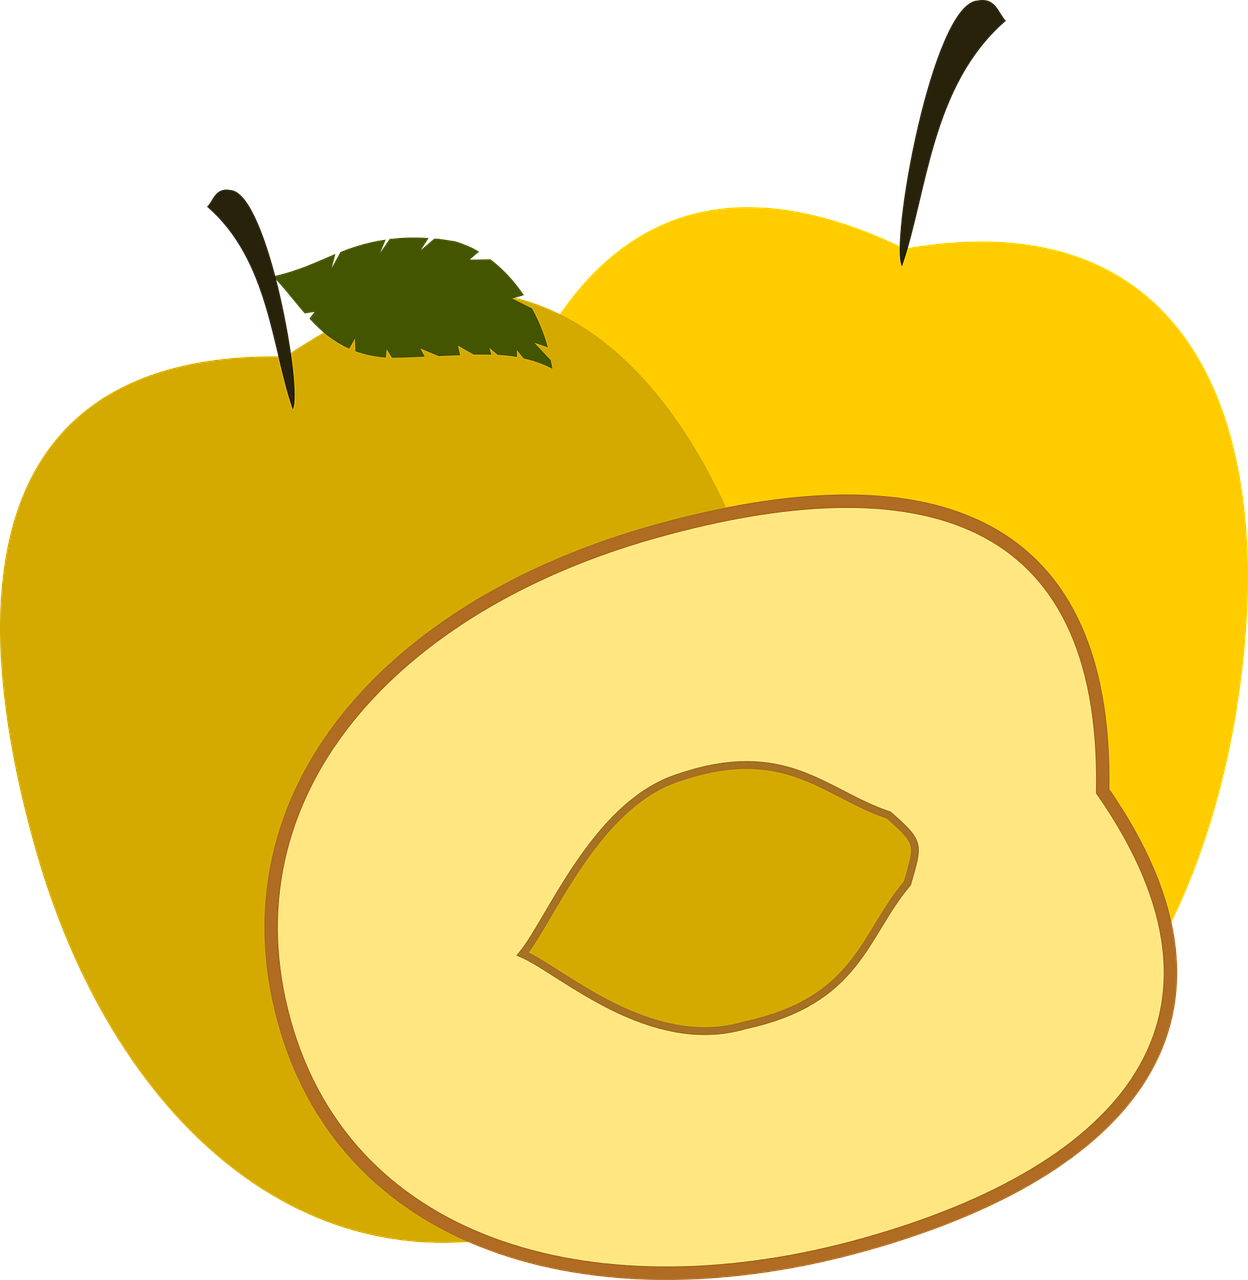 Yellow Plums Illustration PNG